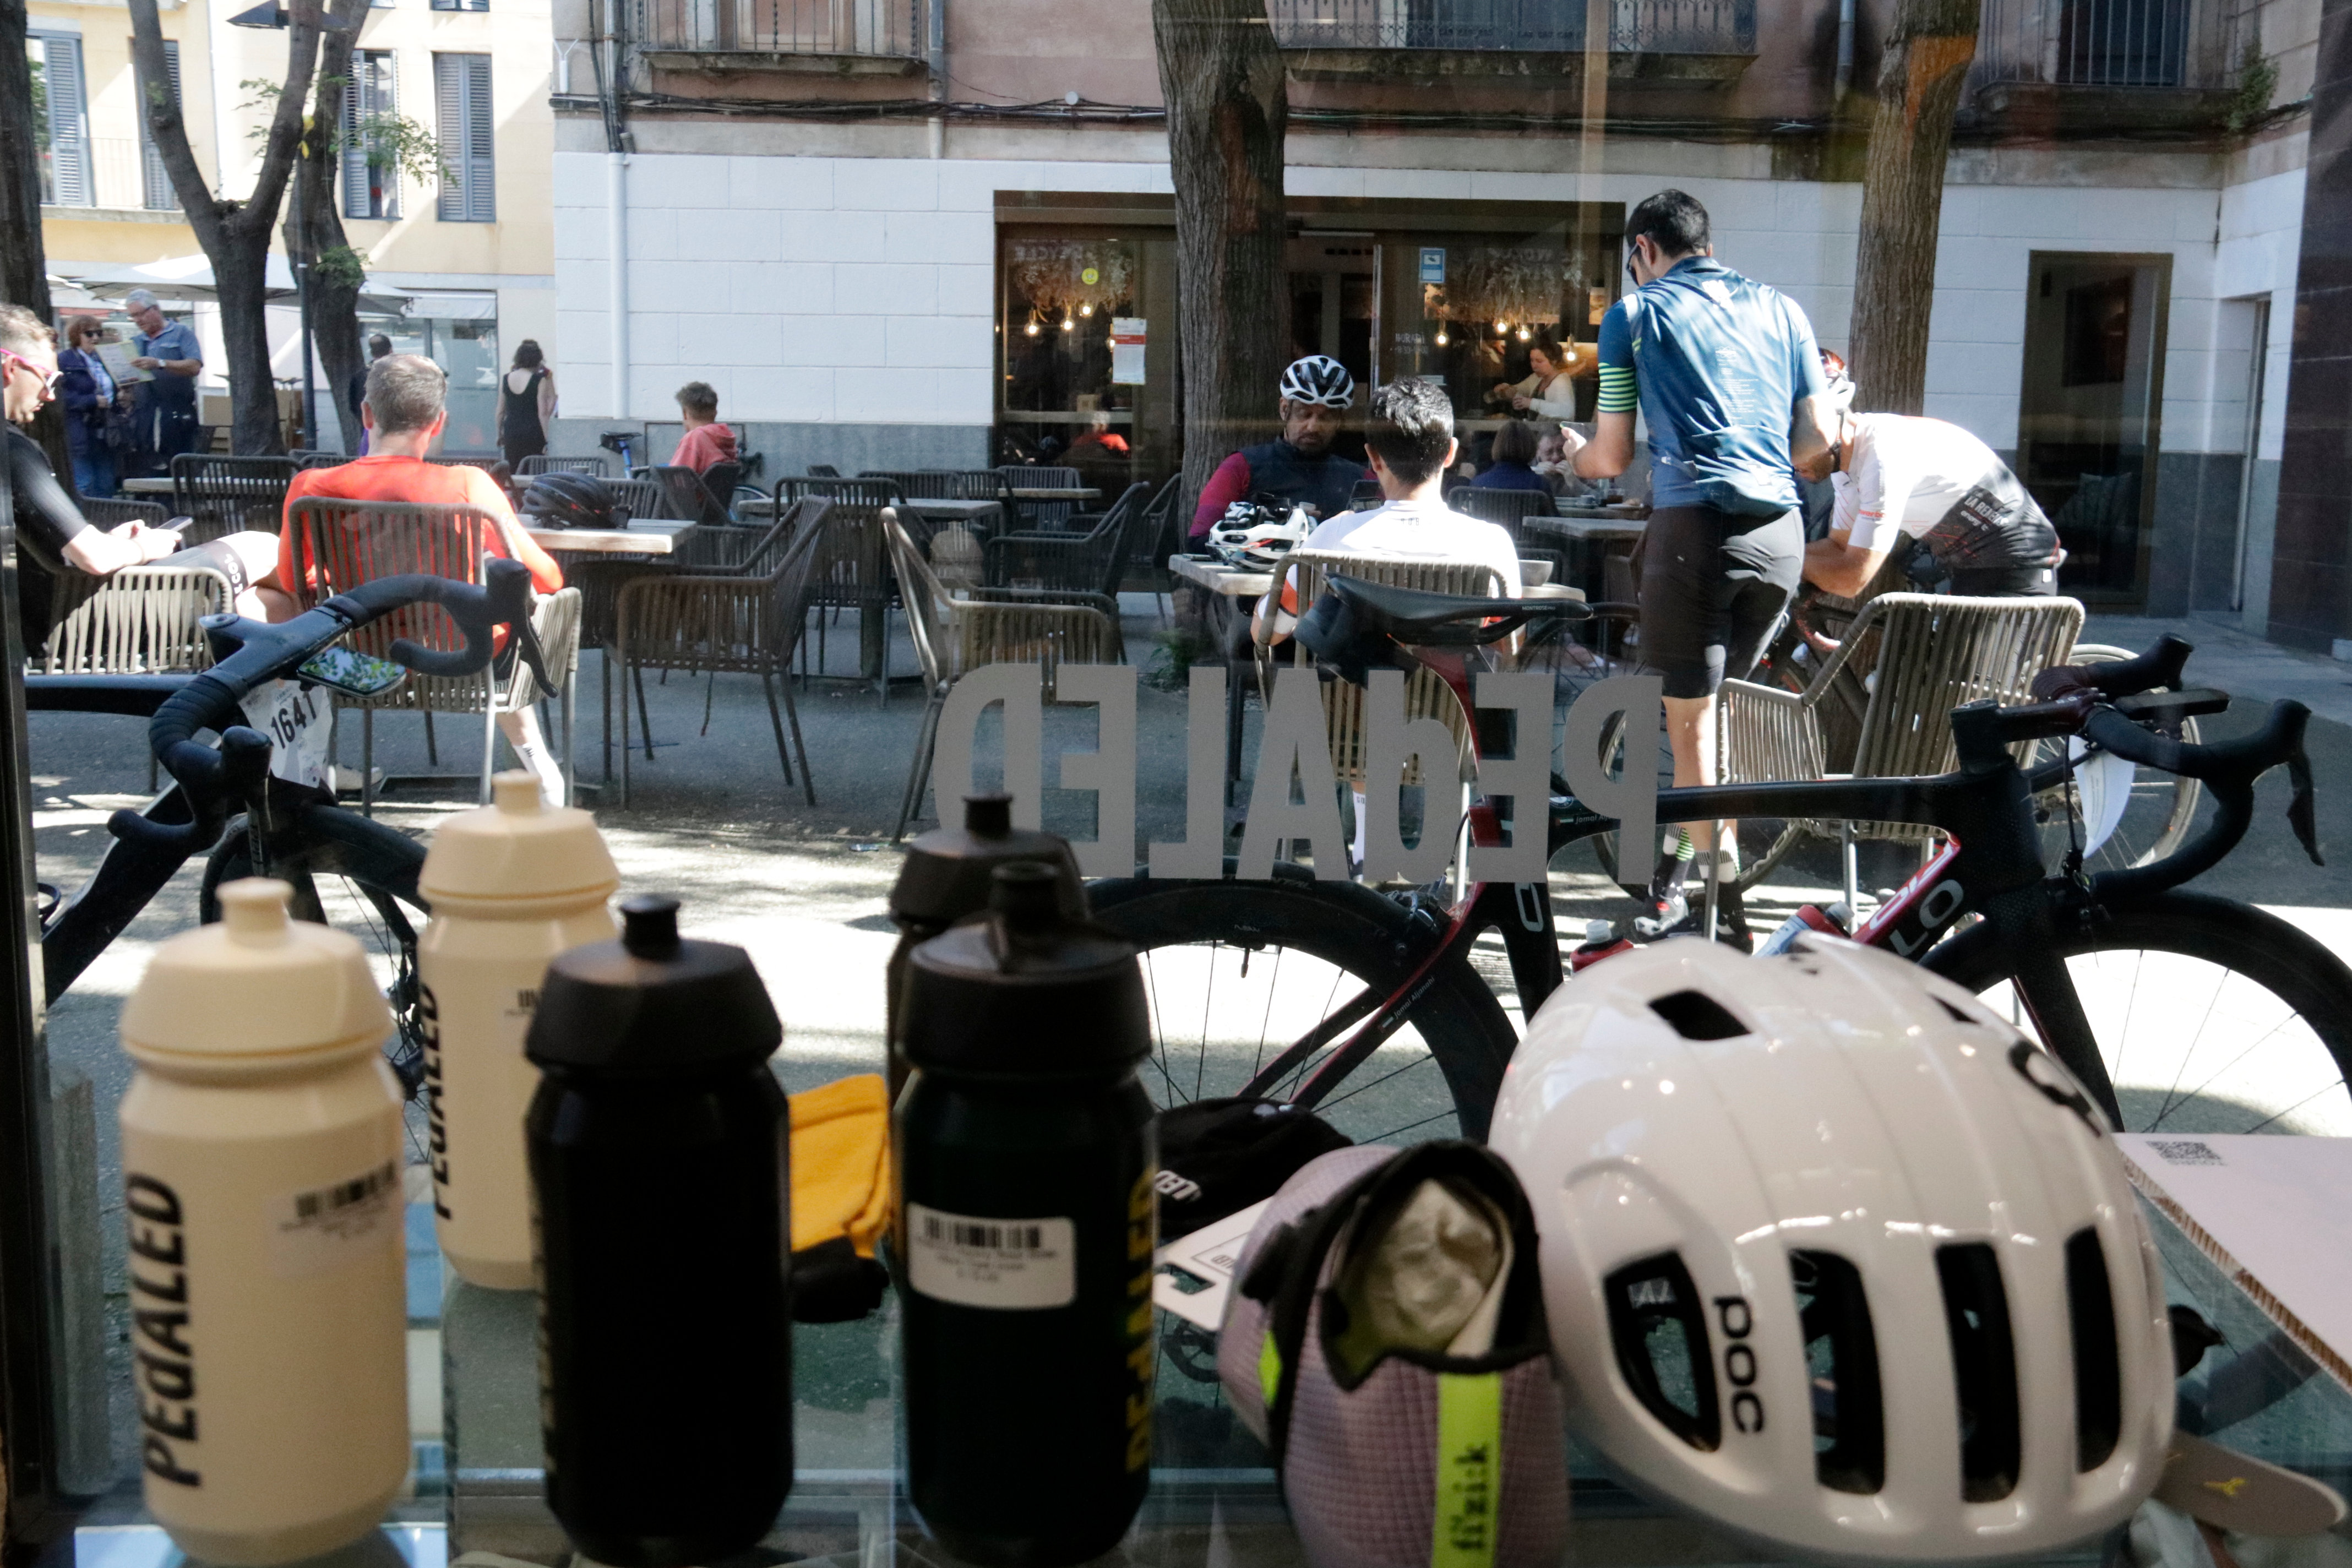 A helmet and water bottles on view in the window of Eat Sleep Cycle, in Girona